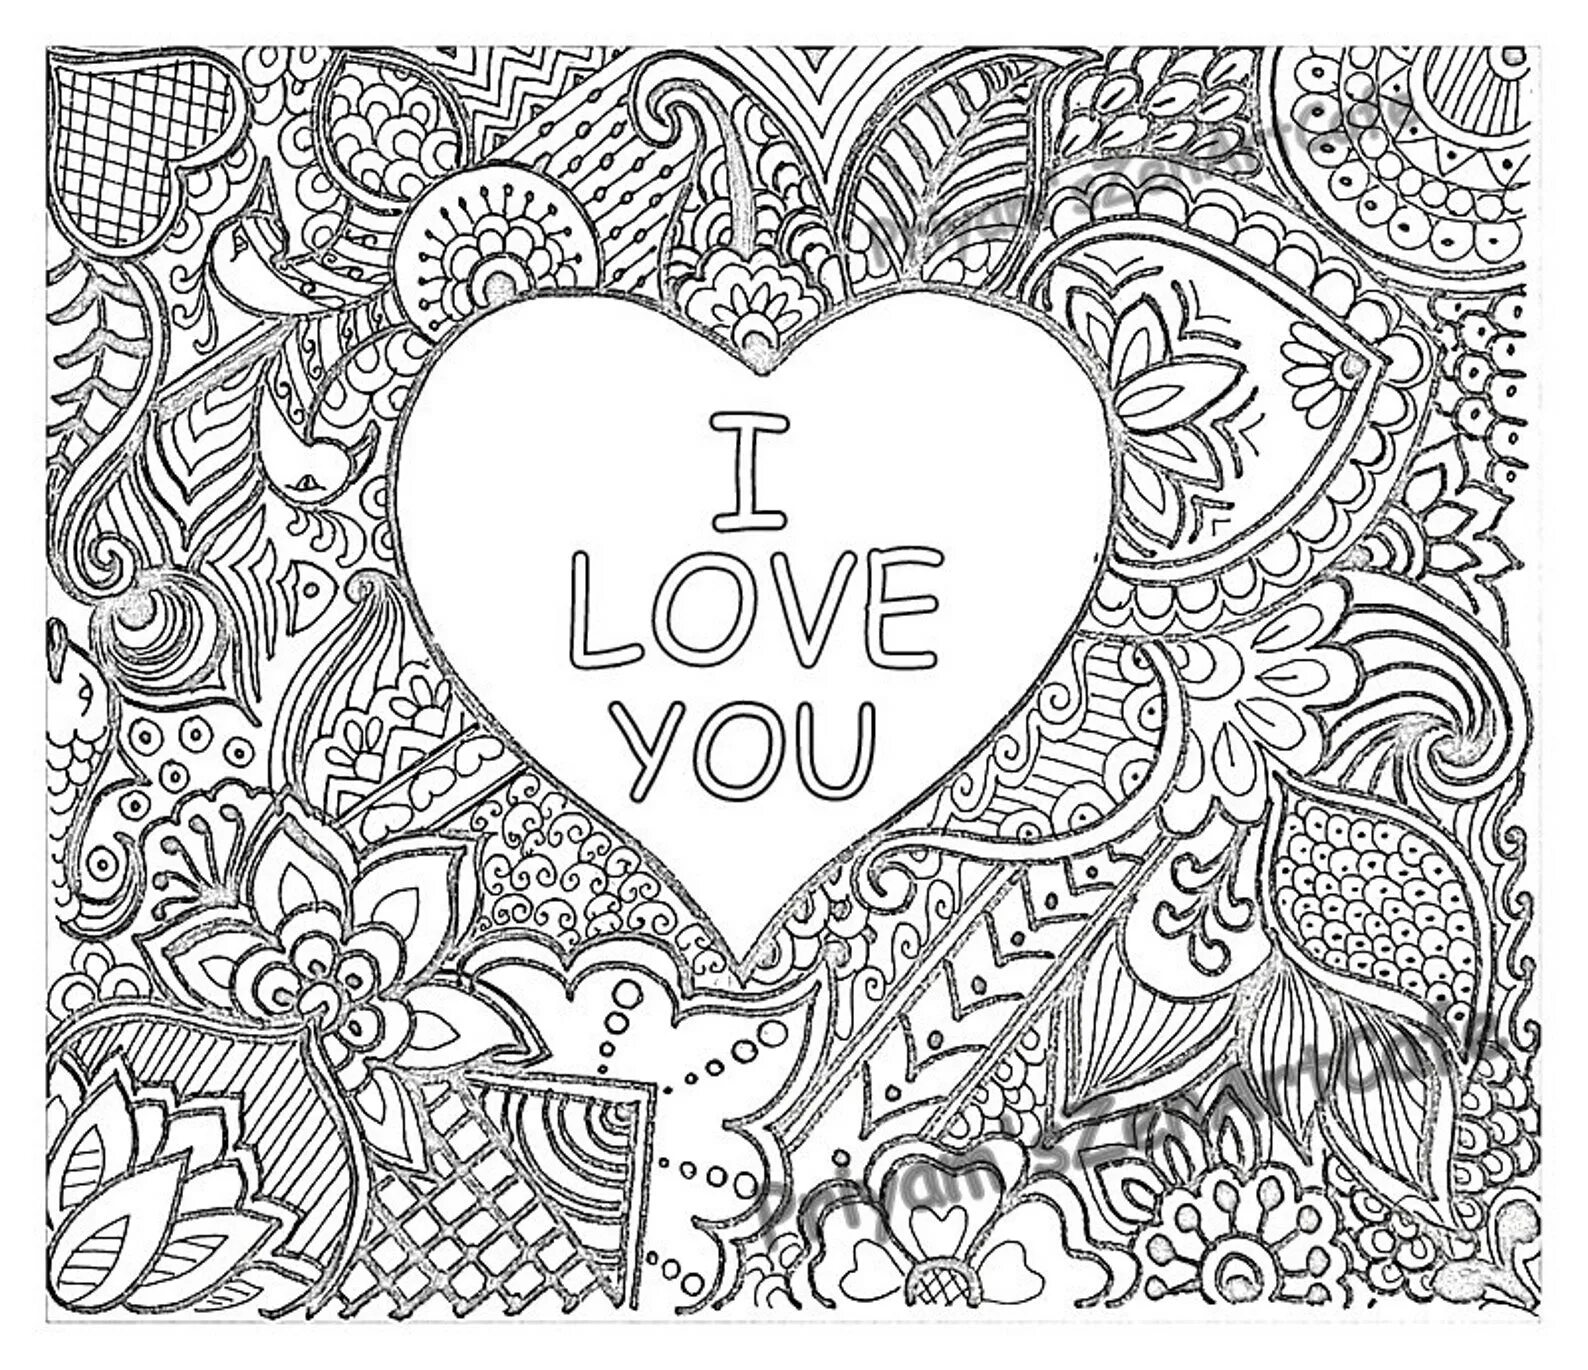 Coloring book gorgeous love antistress